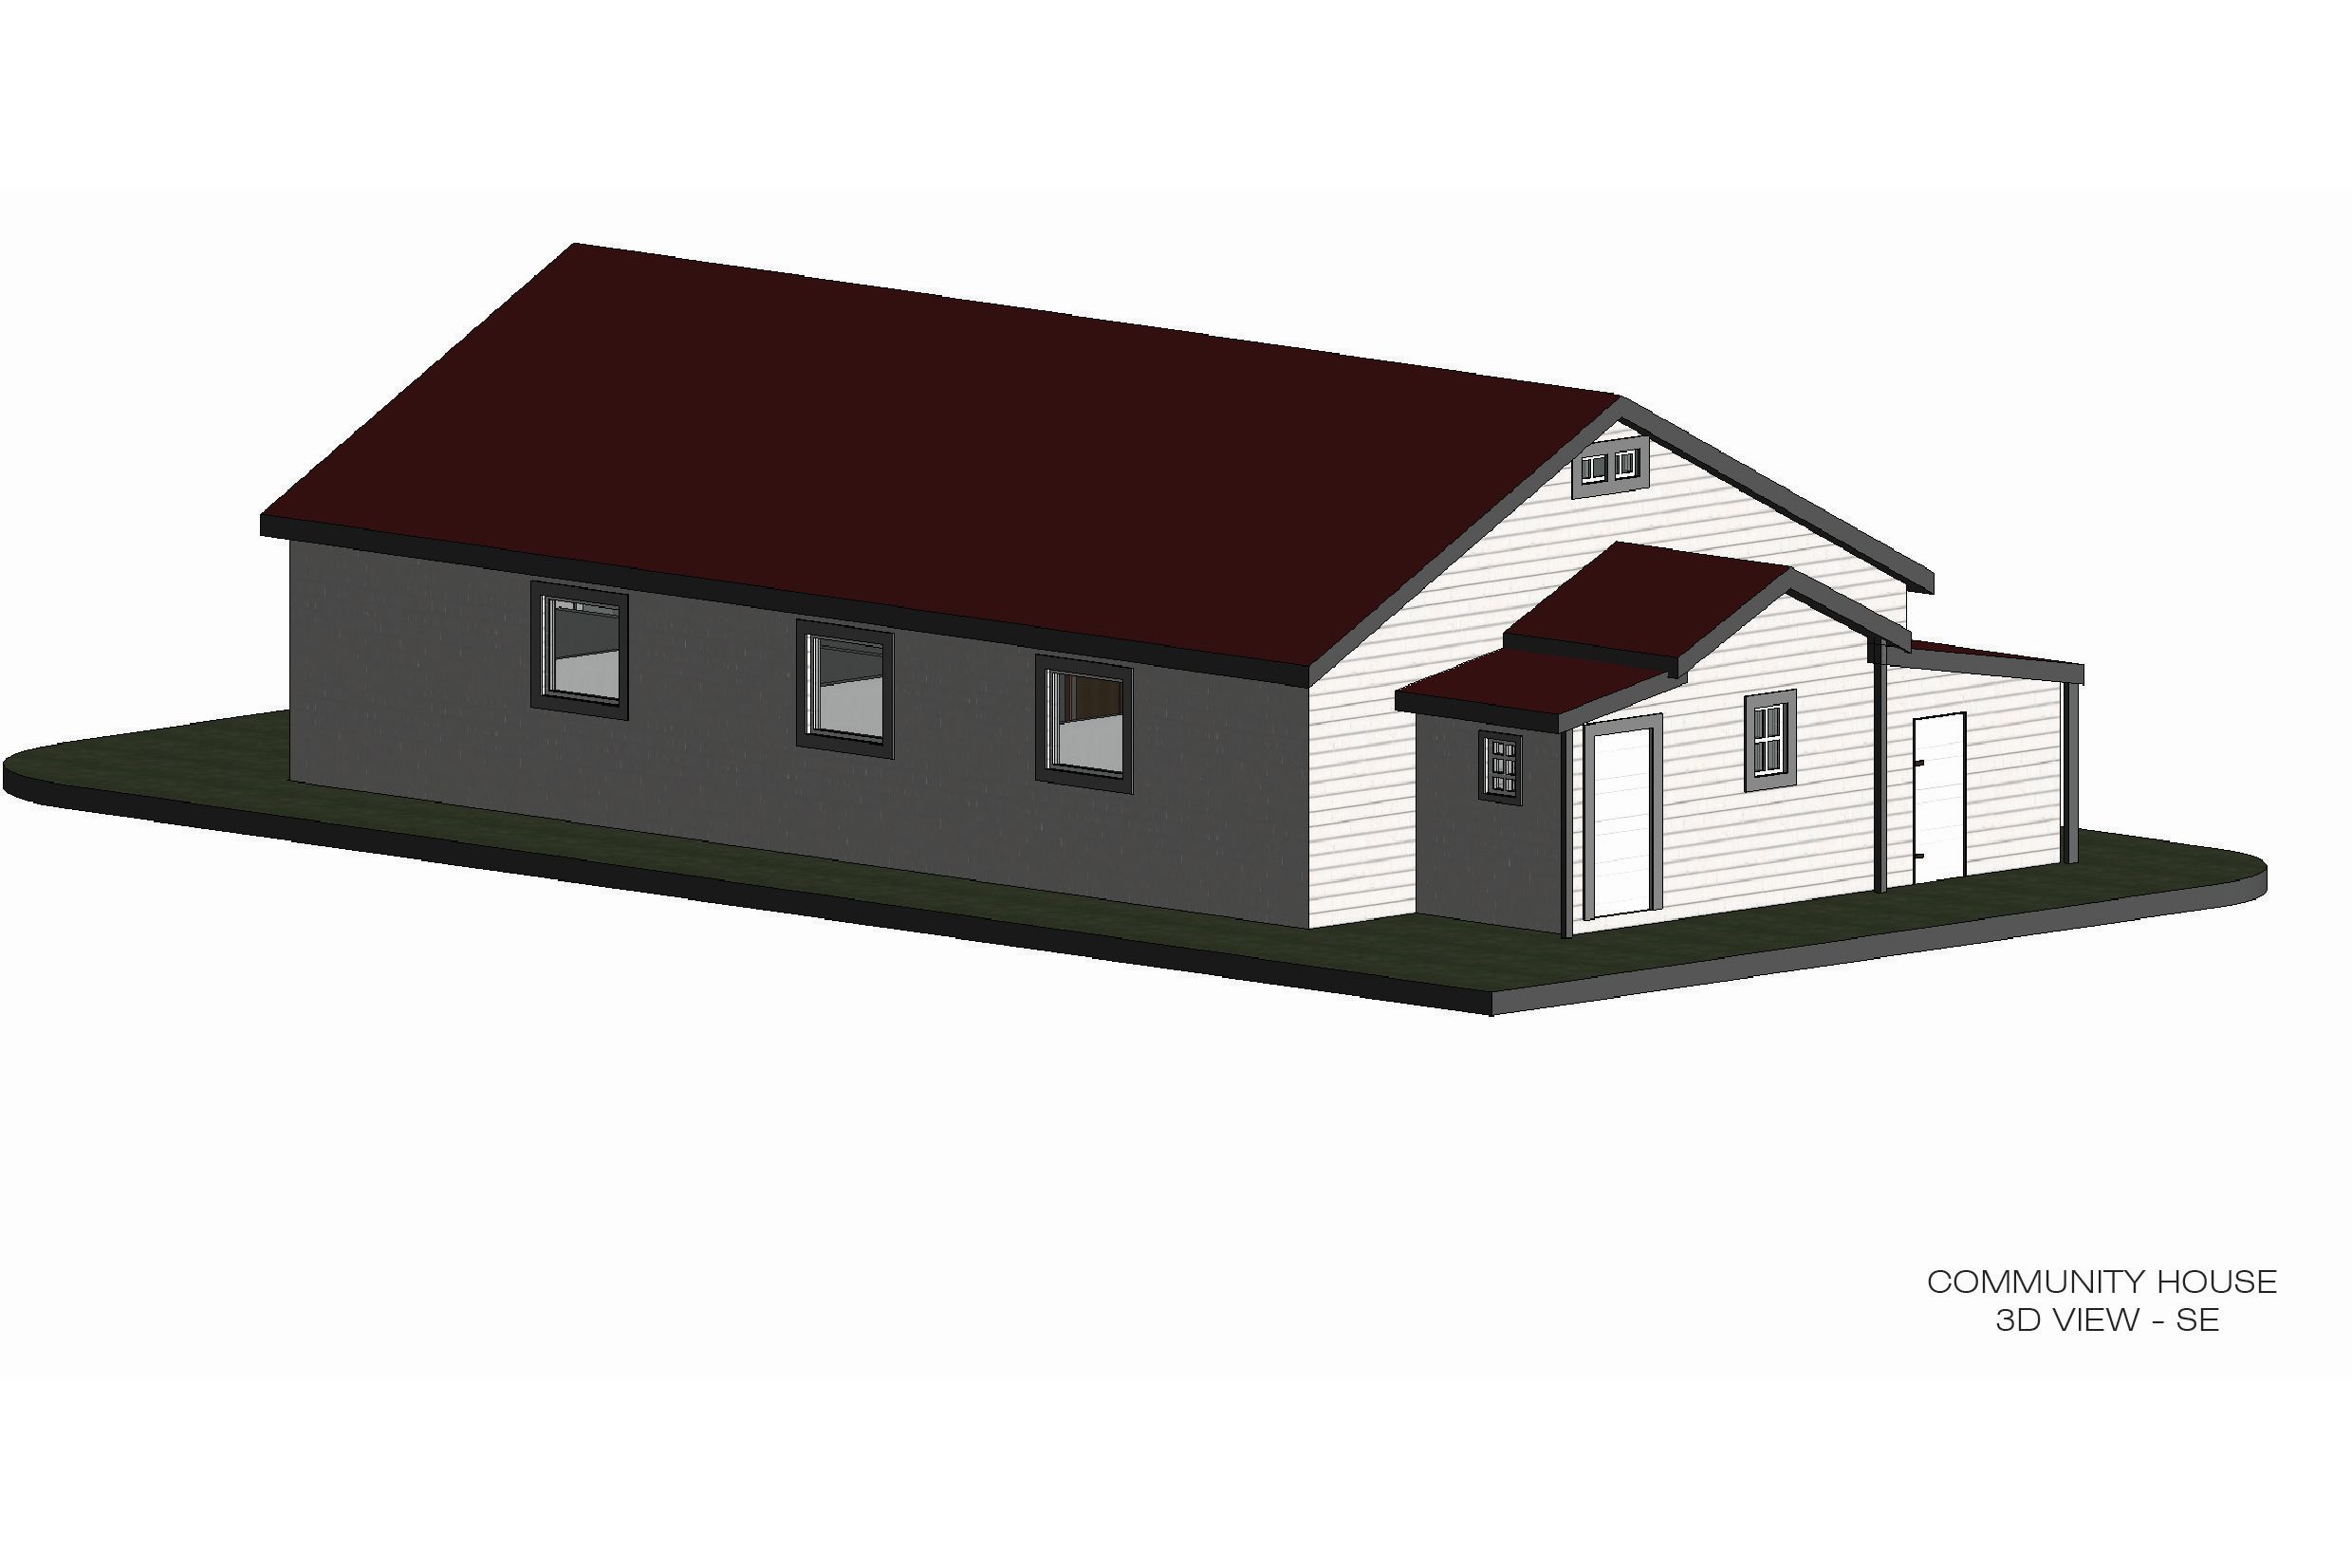 Southeast view of 3D model created in Revit from the laser scanning data collected of the community house.